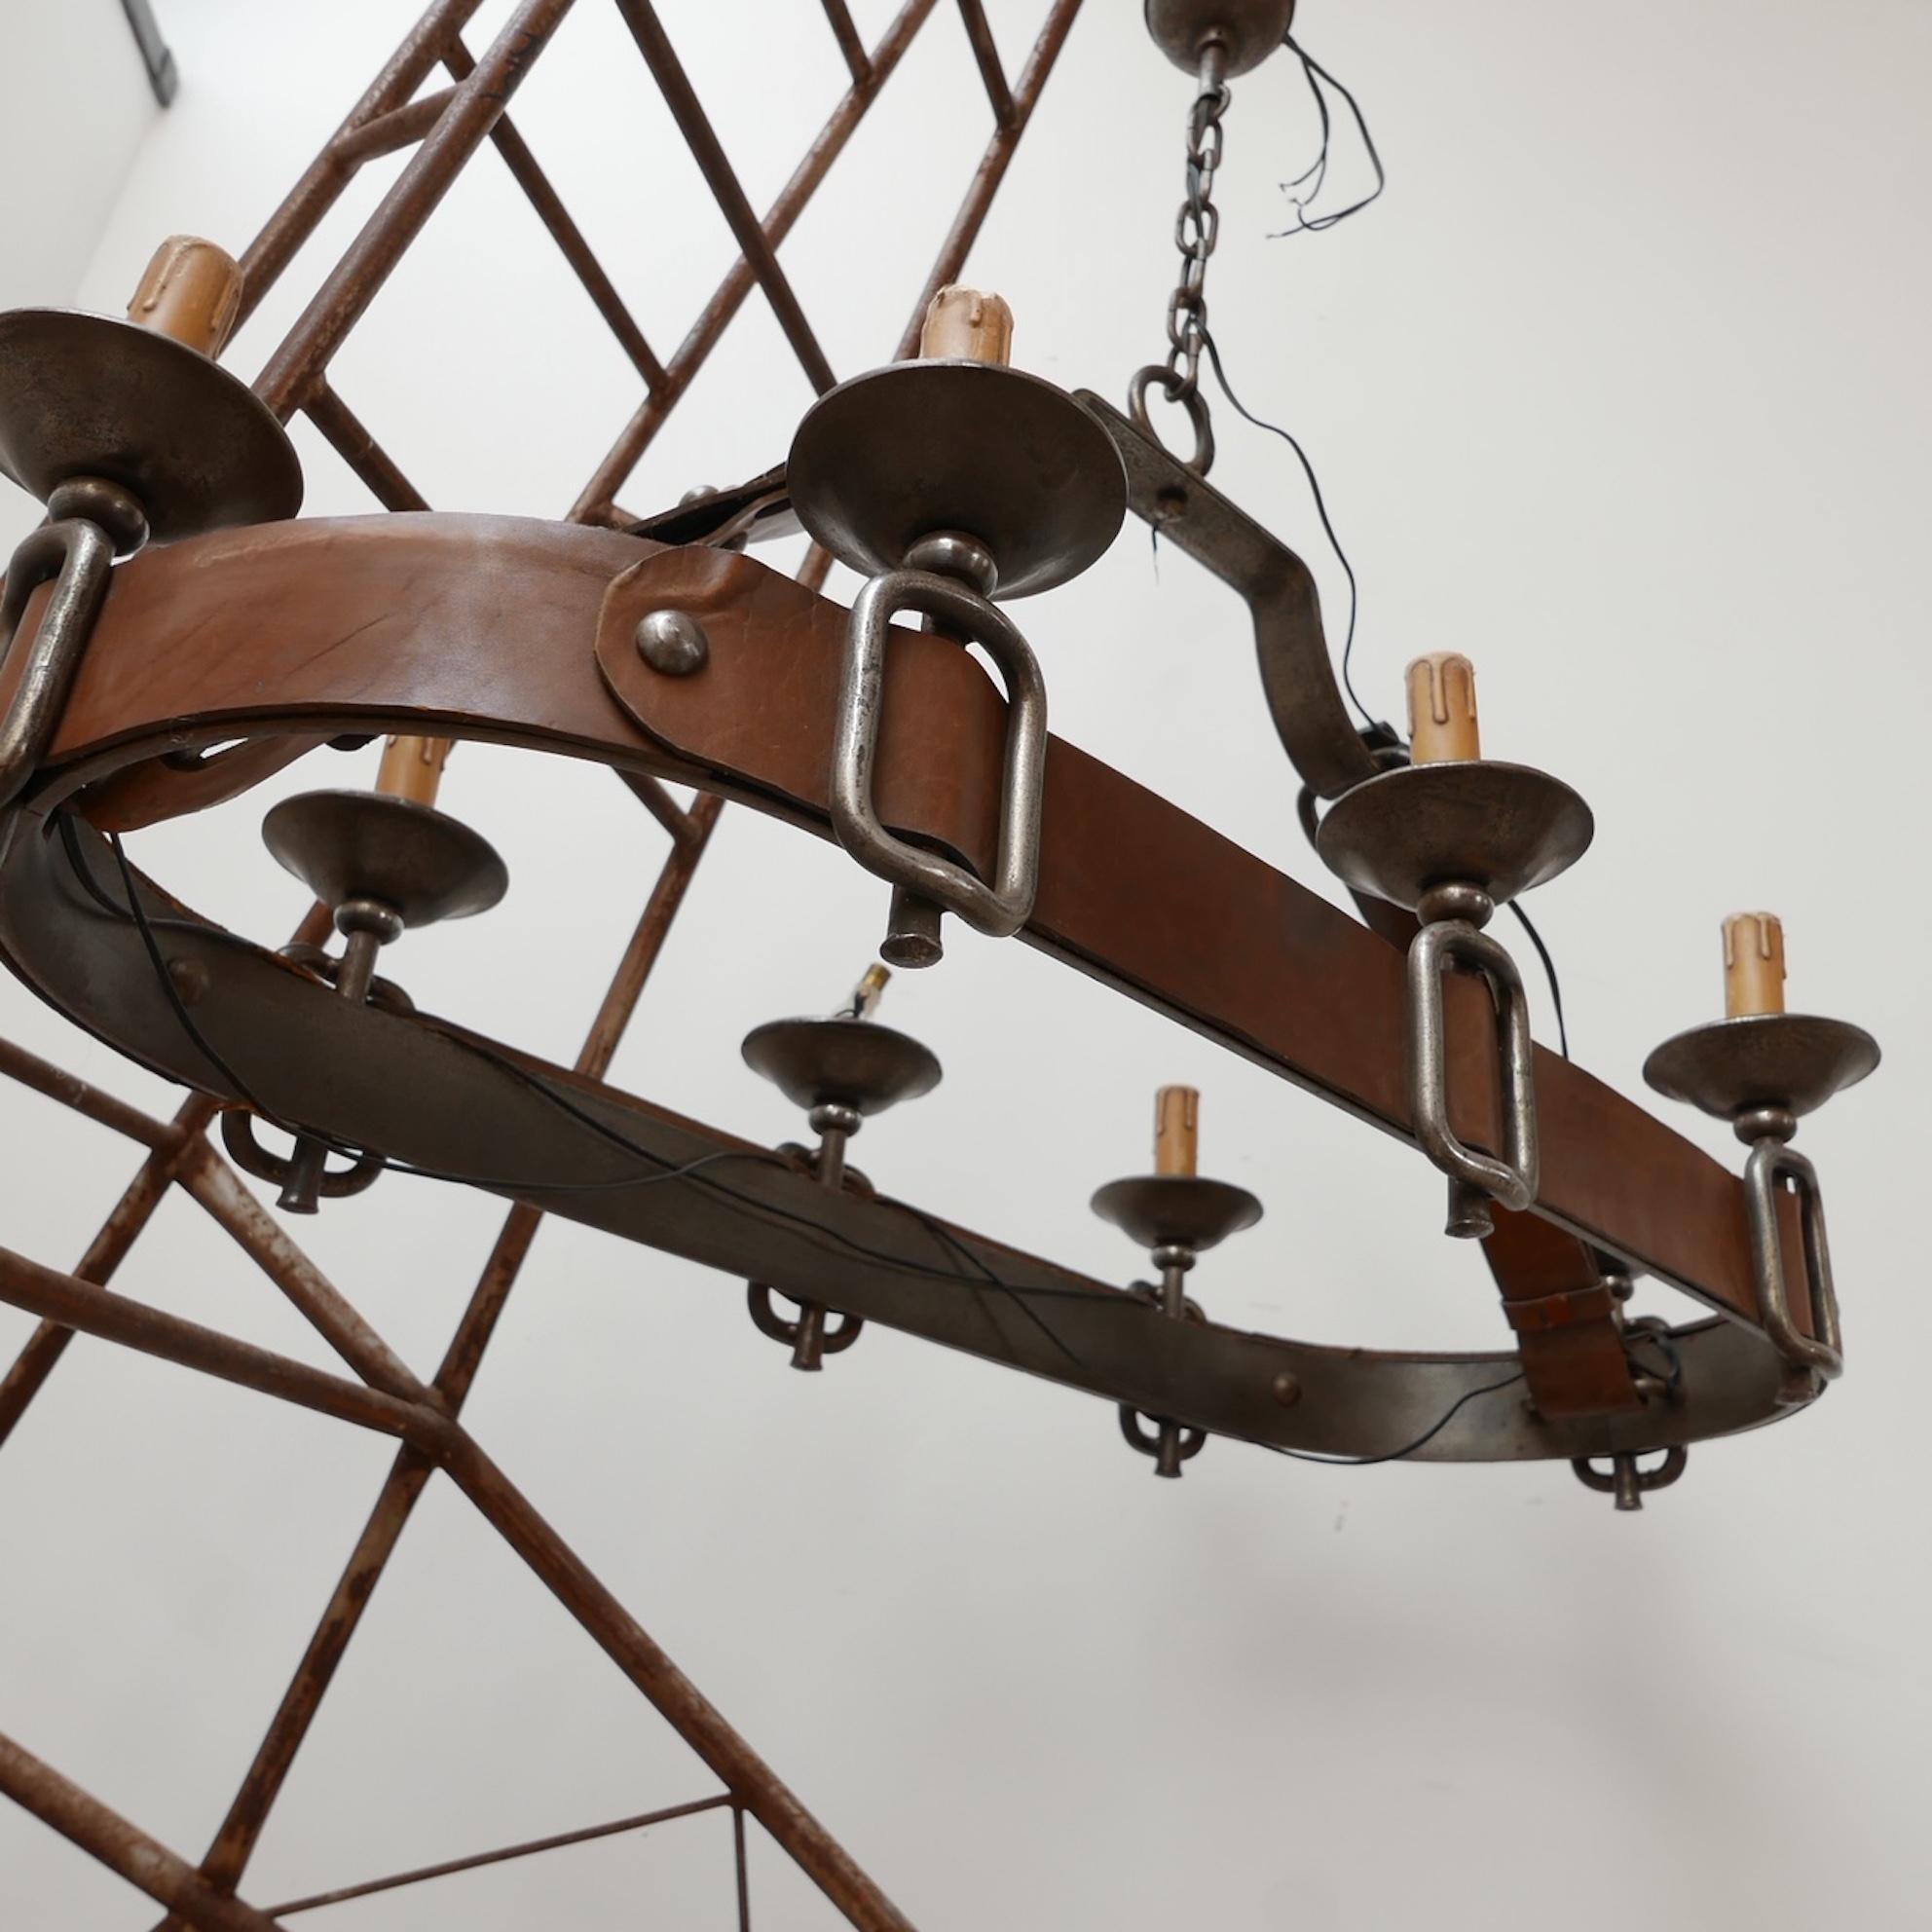 A very good quality French chandelier in the manner of Jacques Adnet. 

France, c1950s. 

Leather work and iron buckles. 

Since re-wired and PAT tested. 

The faux candleholders will be updated to something new as some were lacking.